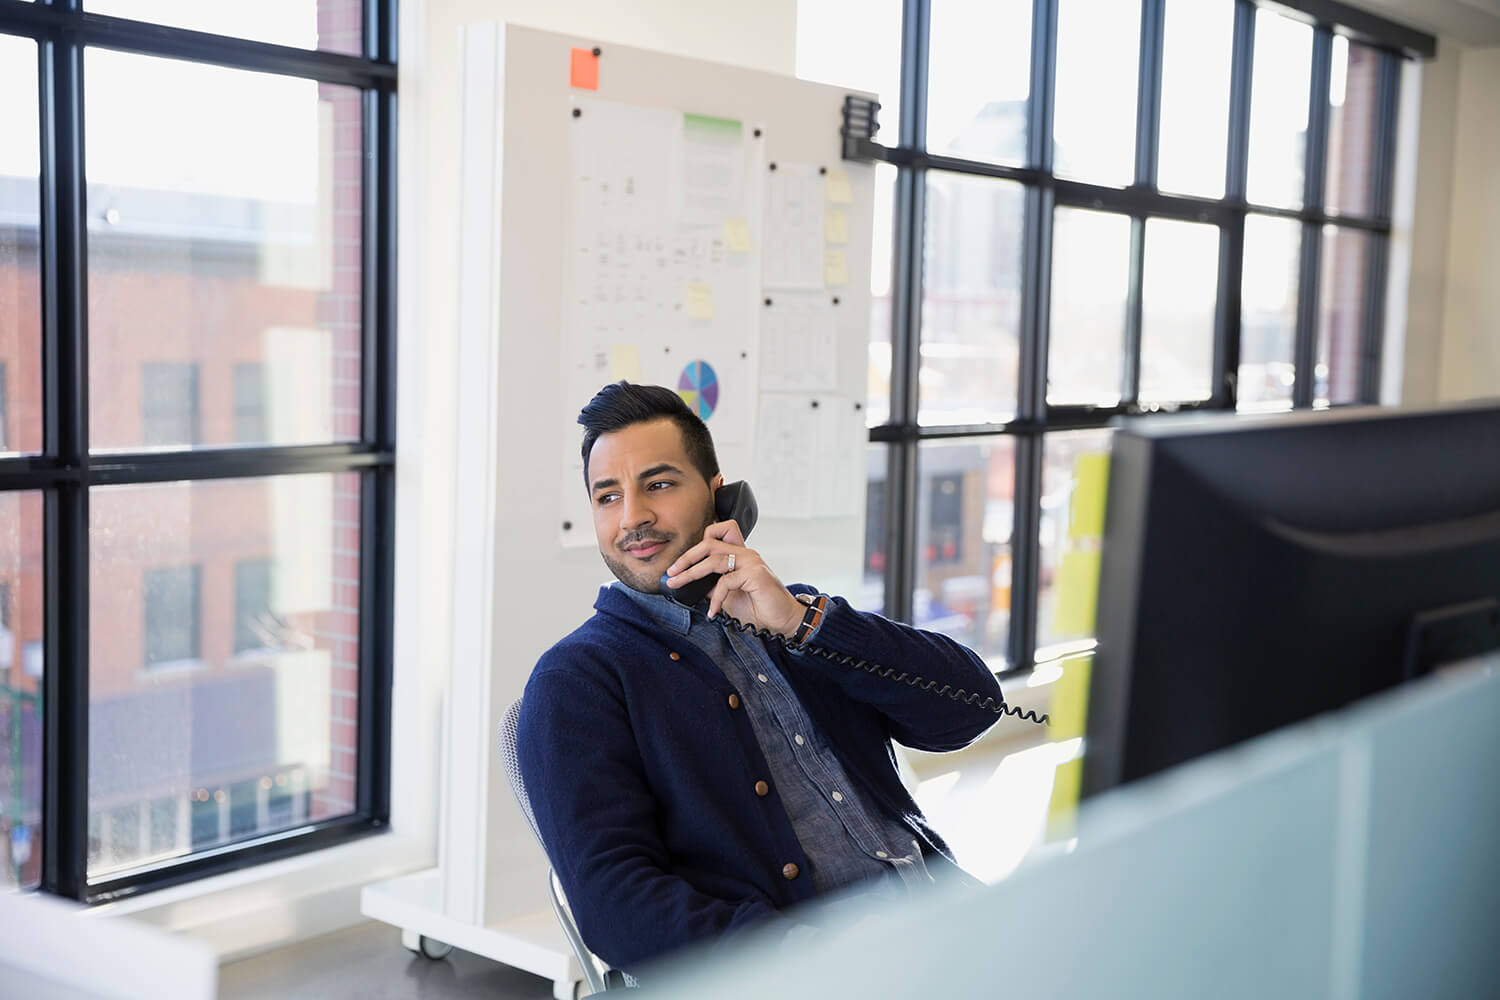 VoIP vs UCaaS: What is right for your business?